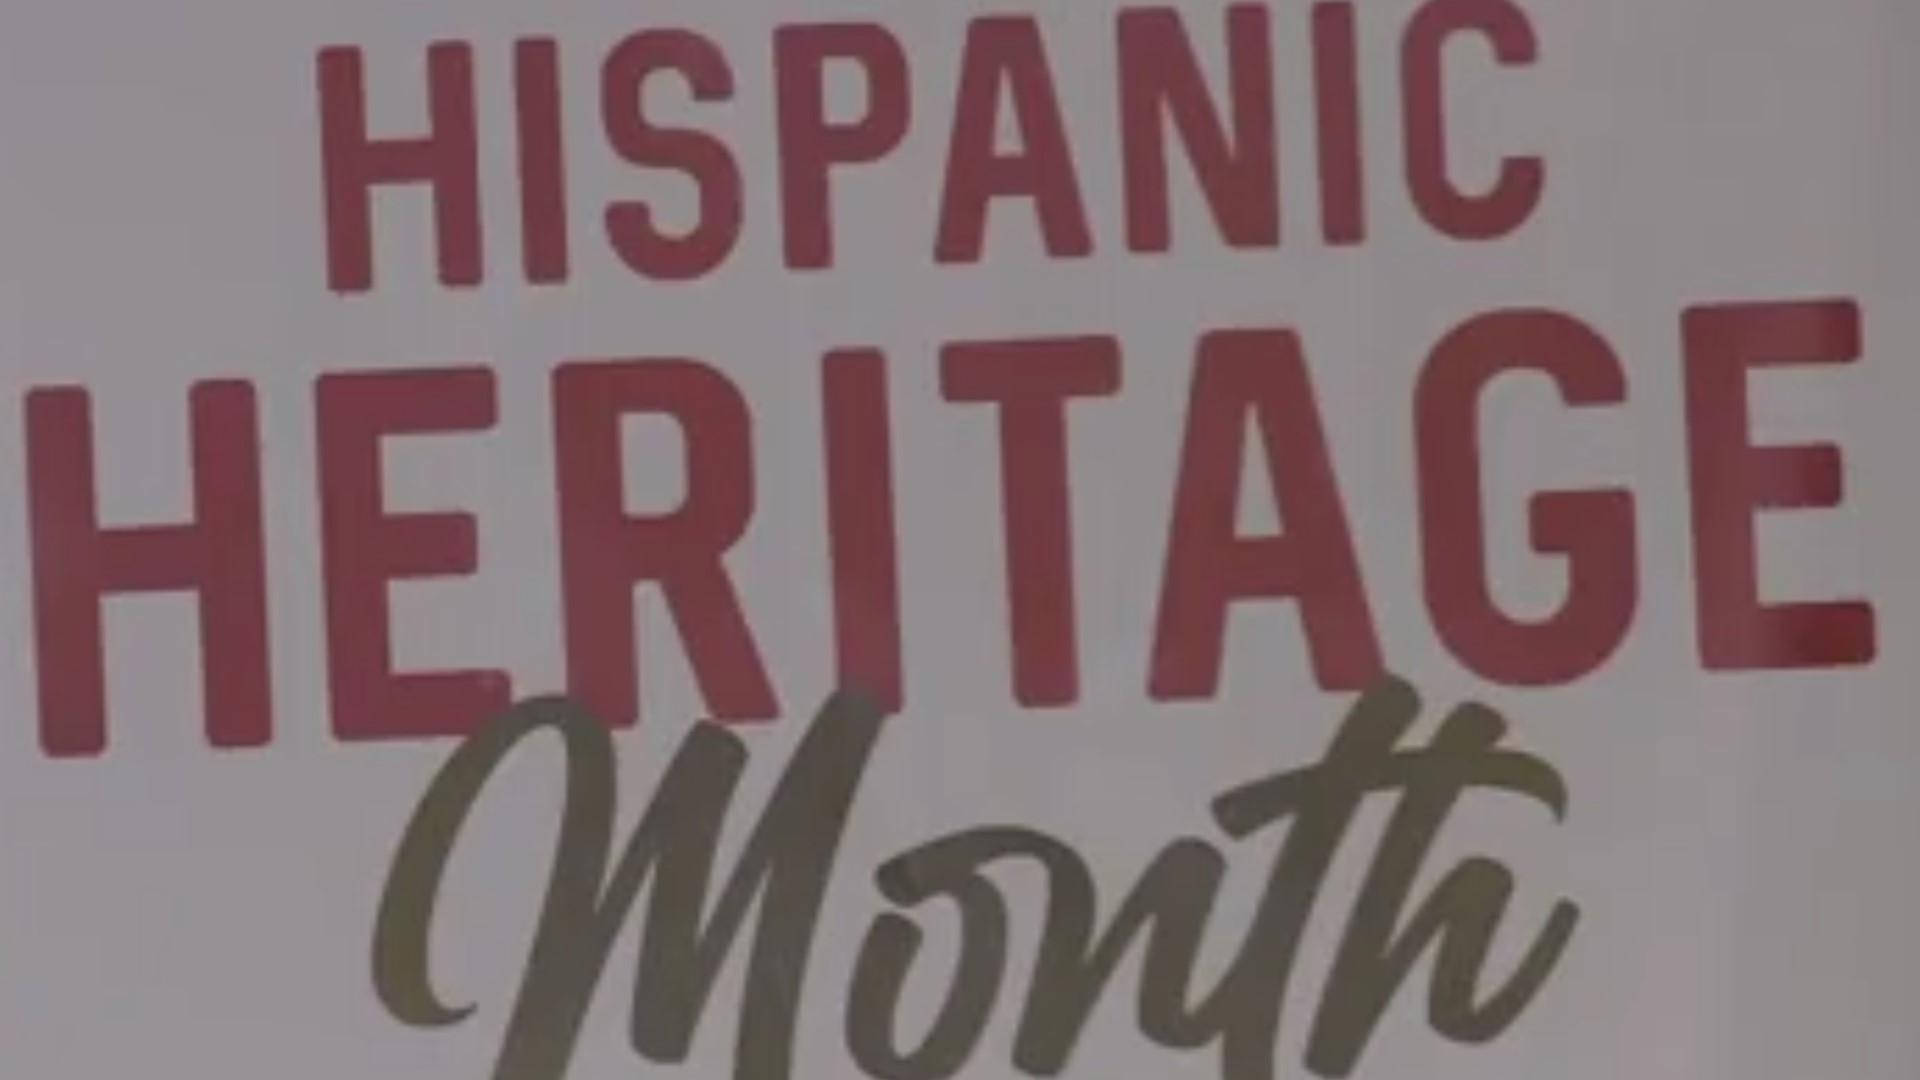 Hispanic Heritage Month events across Northwest Arkansas and the River Valley